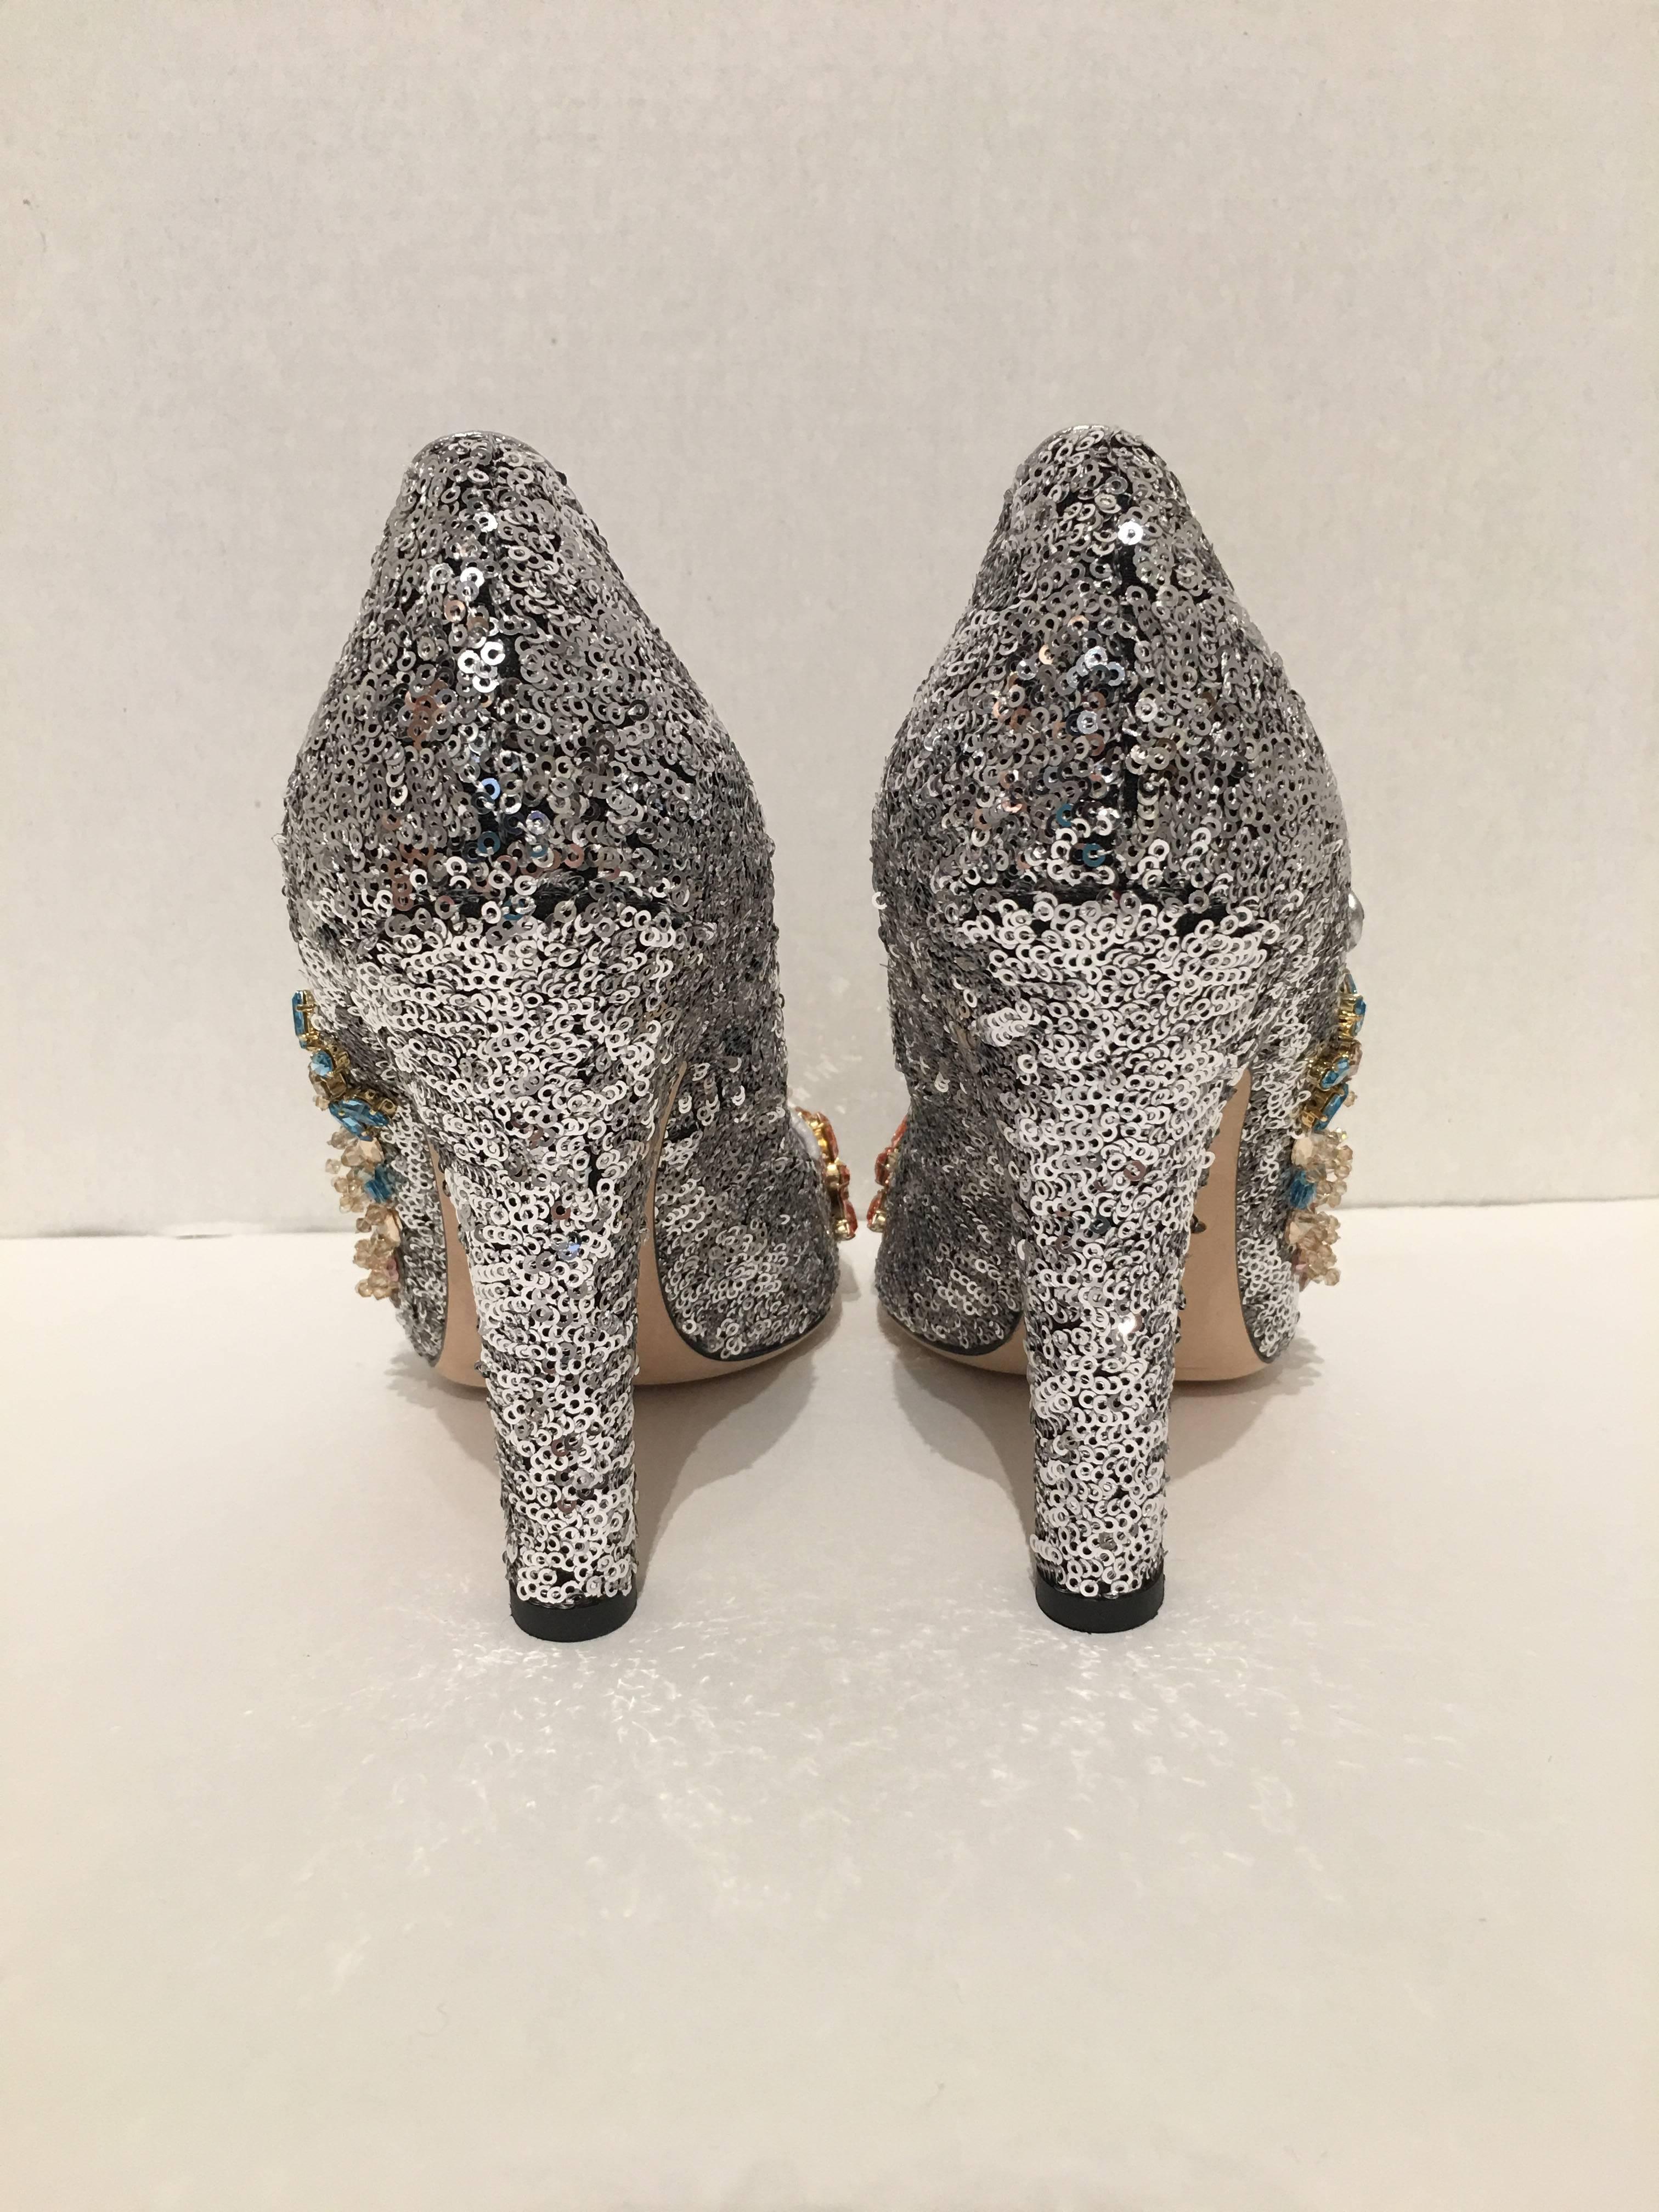 Dolce & Gabbana mary jane pumps in silver sequins with Swarovski crystal flower embellishment on toes and sides..